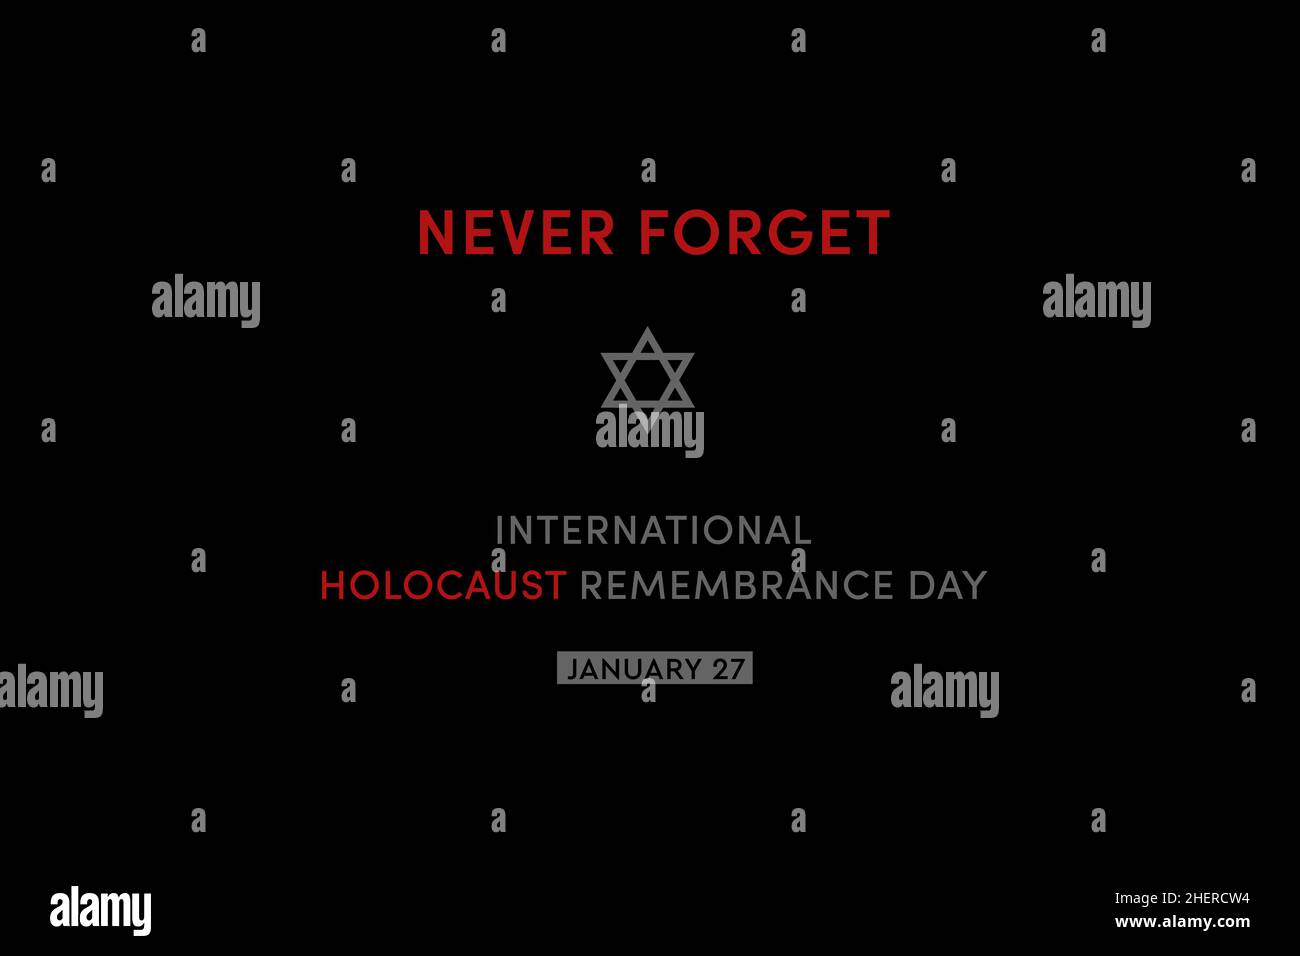 International Holocaust Remembrance Day illustration. Jewish star on a black background. Holocaust Remembrance Day Poster, January 27 Stock Photo